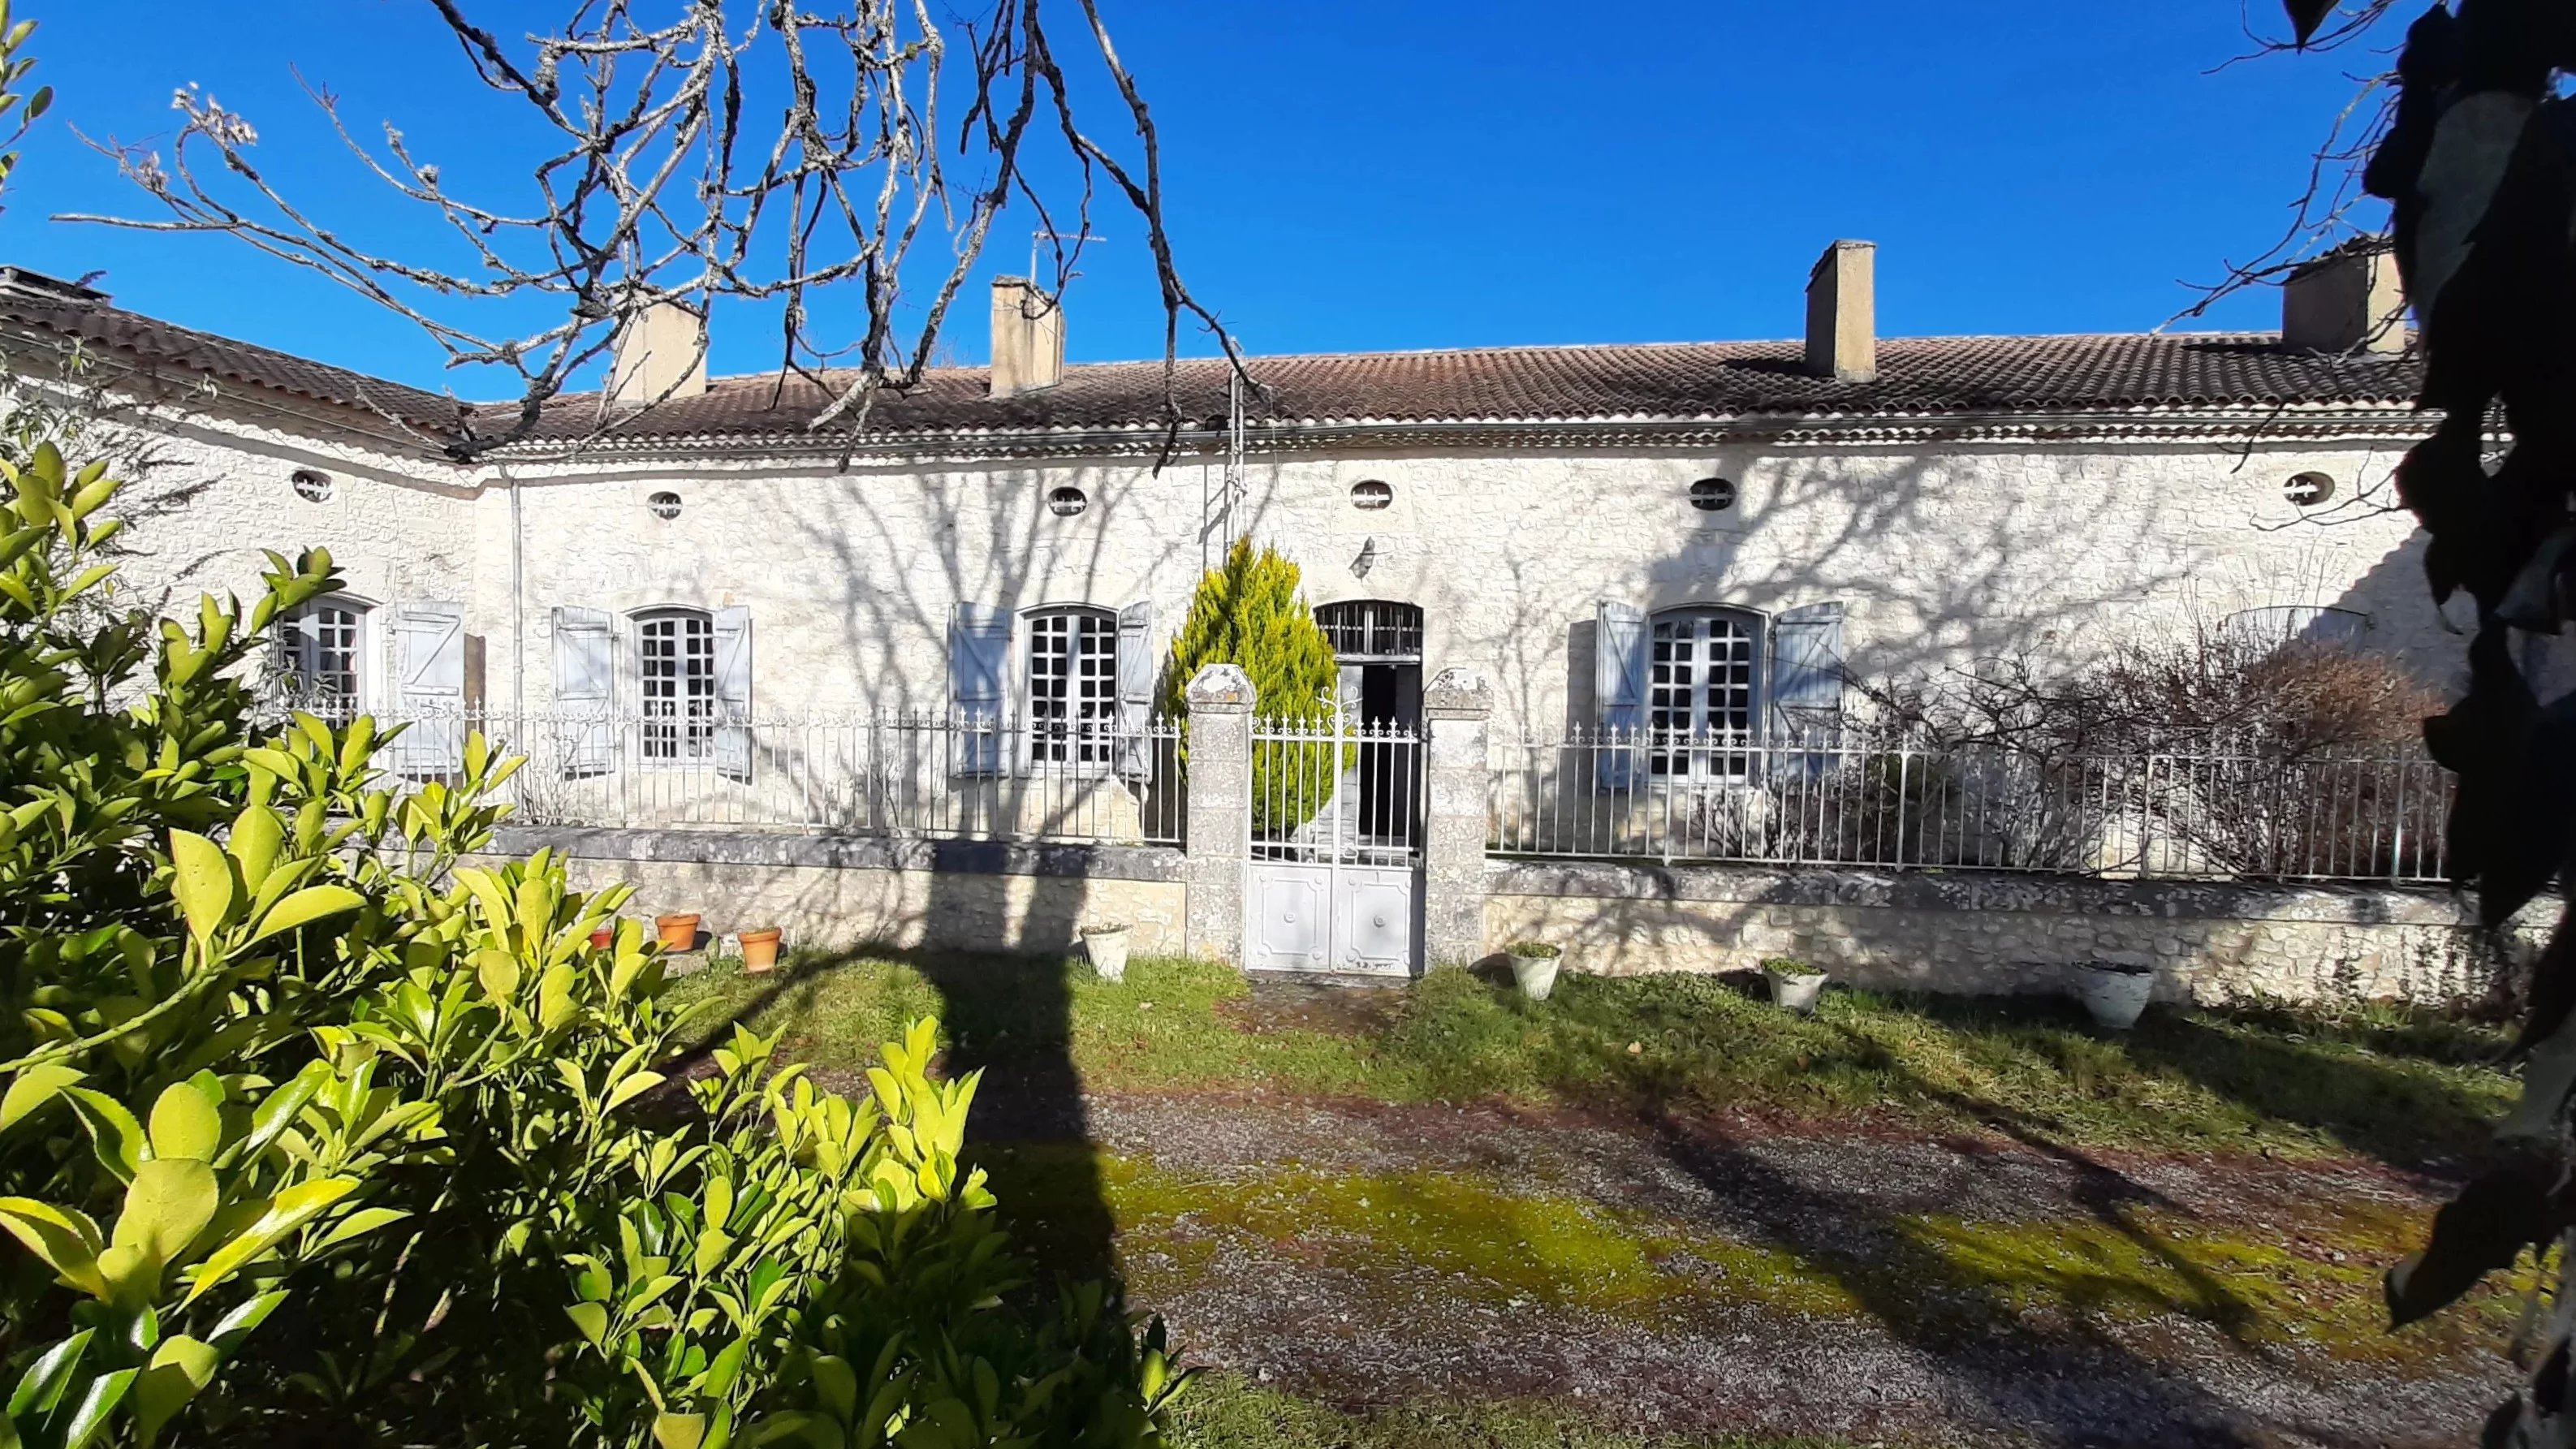 An 18th century chartreuse to update, with separate guest cottages and around 10 hectares